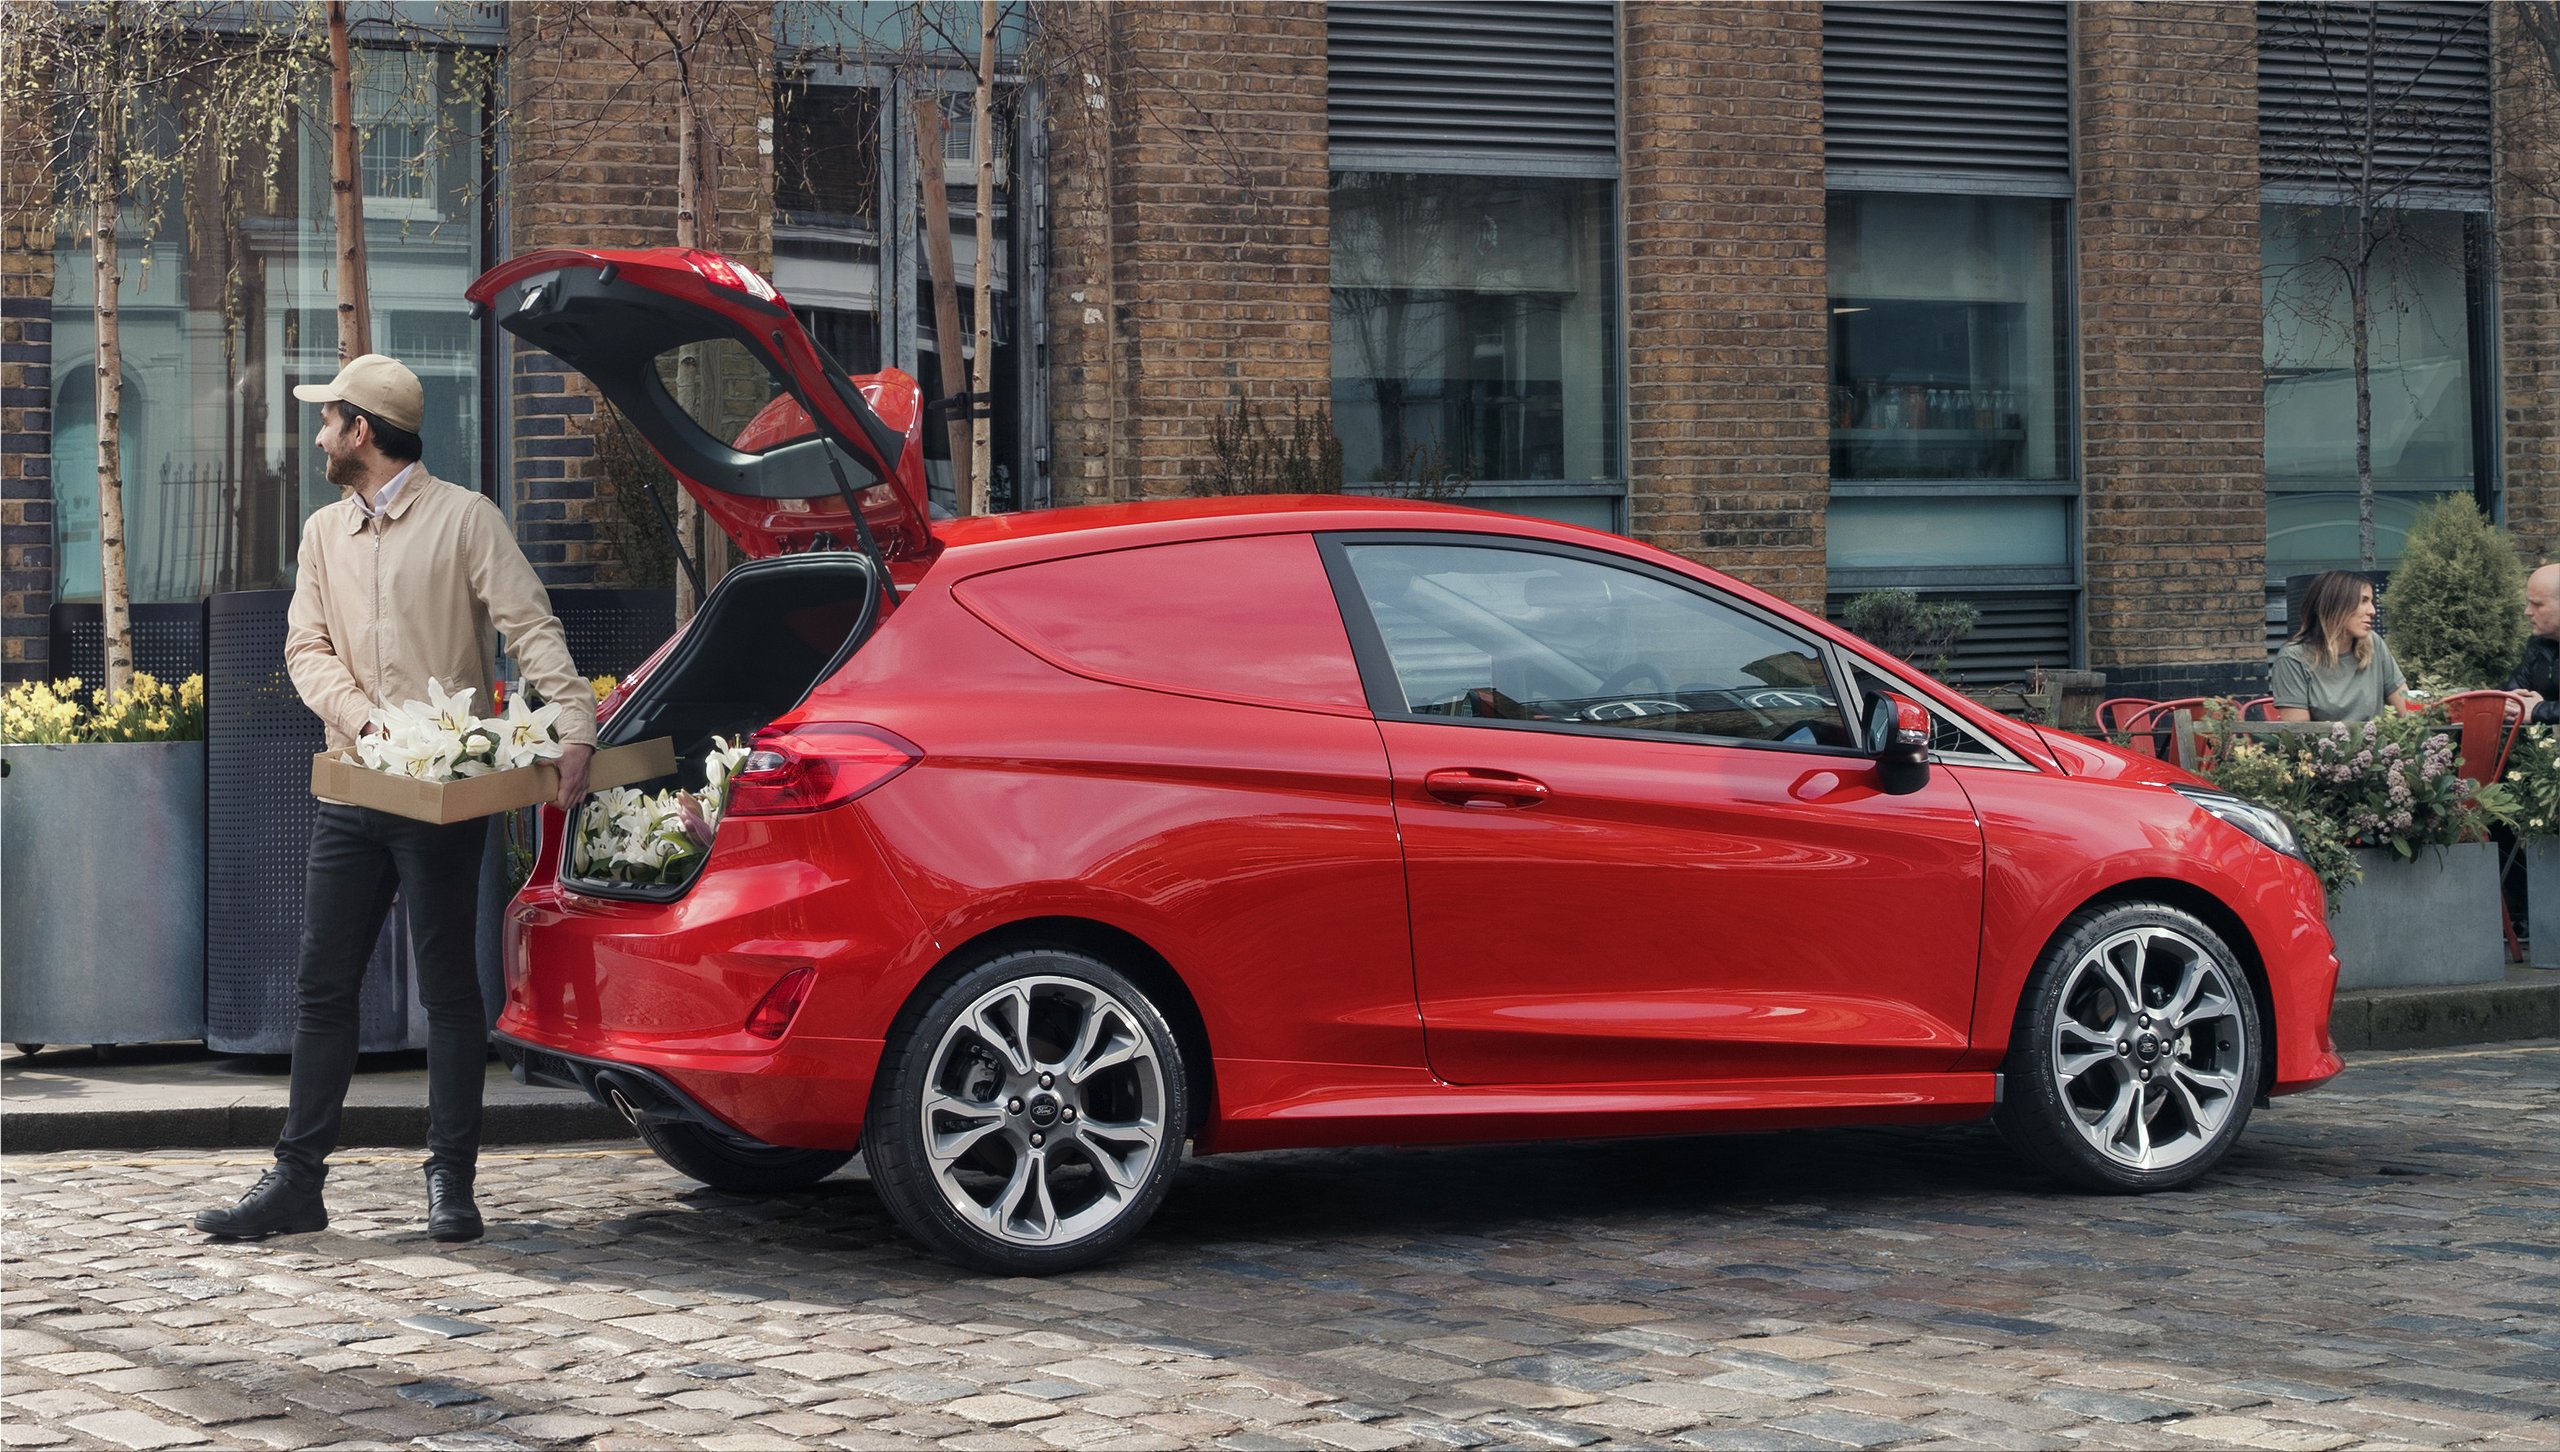 Ford Fiesta Van EcoBoost Hybrid offers superior engine performance and